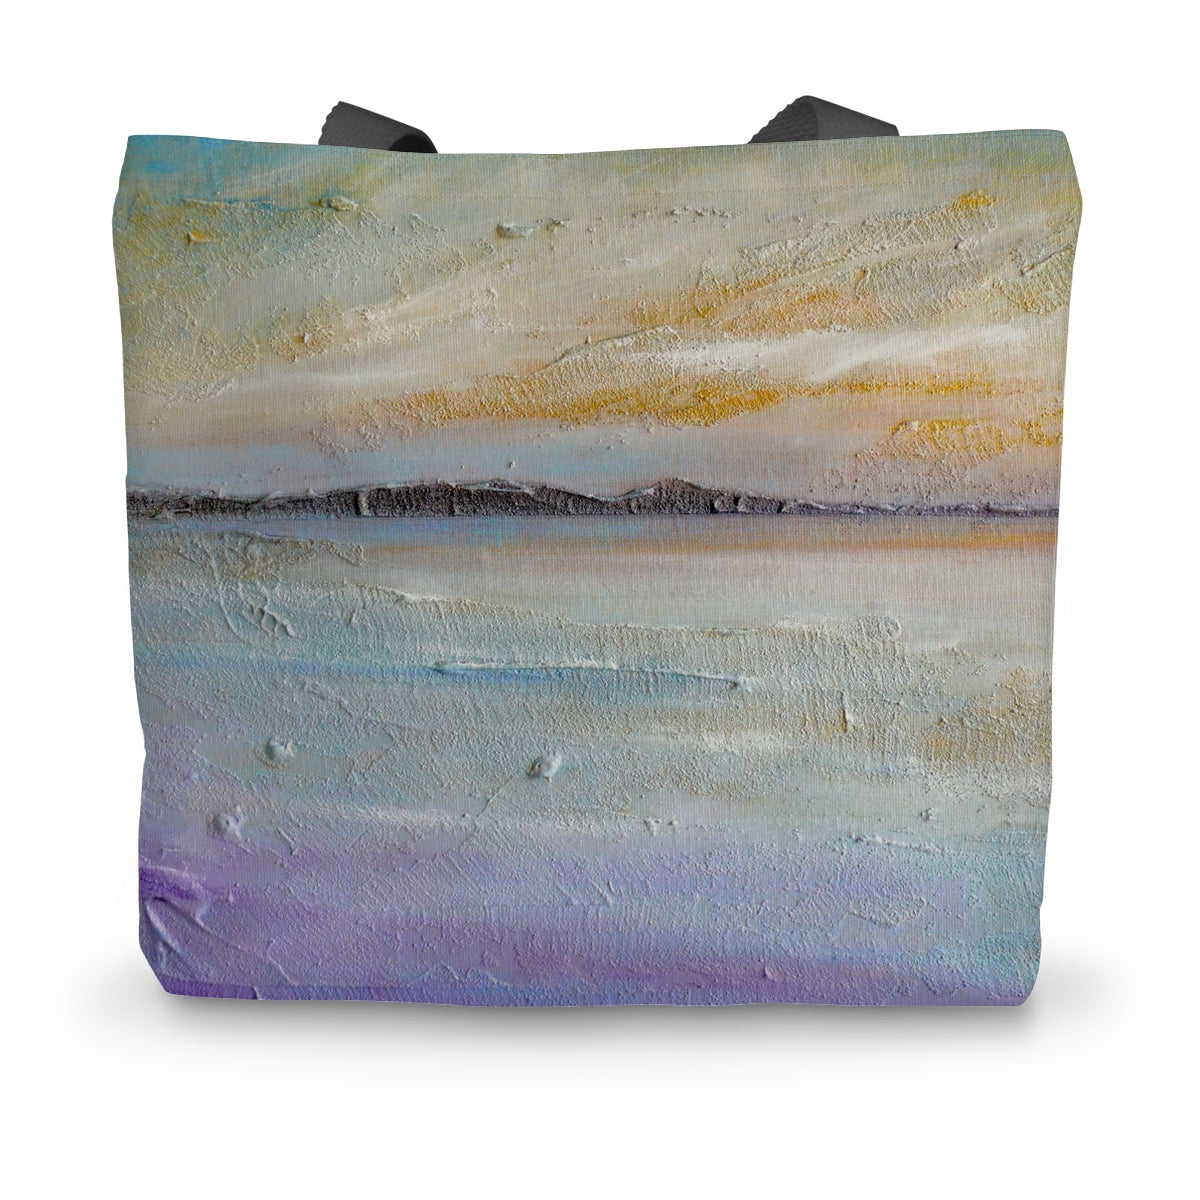 Sollas Beach South Uist Art Gifts Canvas Tote Bag-Bags-Hebridean Islands Art Gallery-14"x18.5"-Paintings, Prints, Homeware, Art Gifts From Scotland By Scottish Artist Kevin Hunter